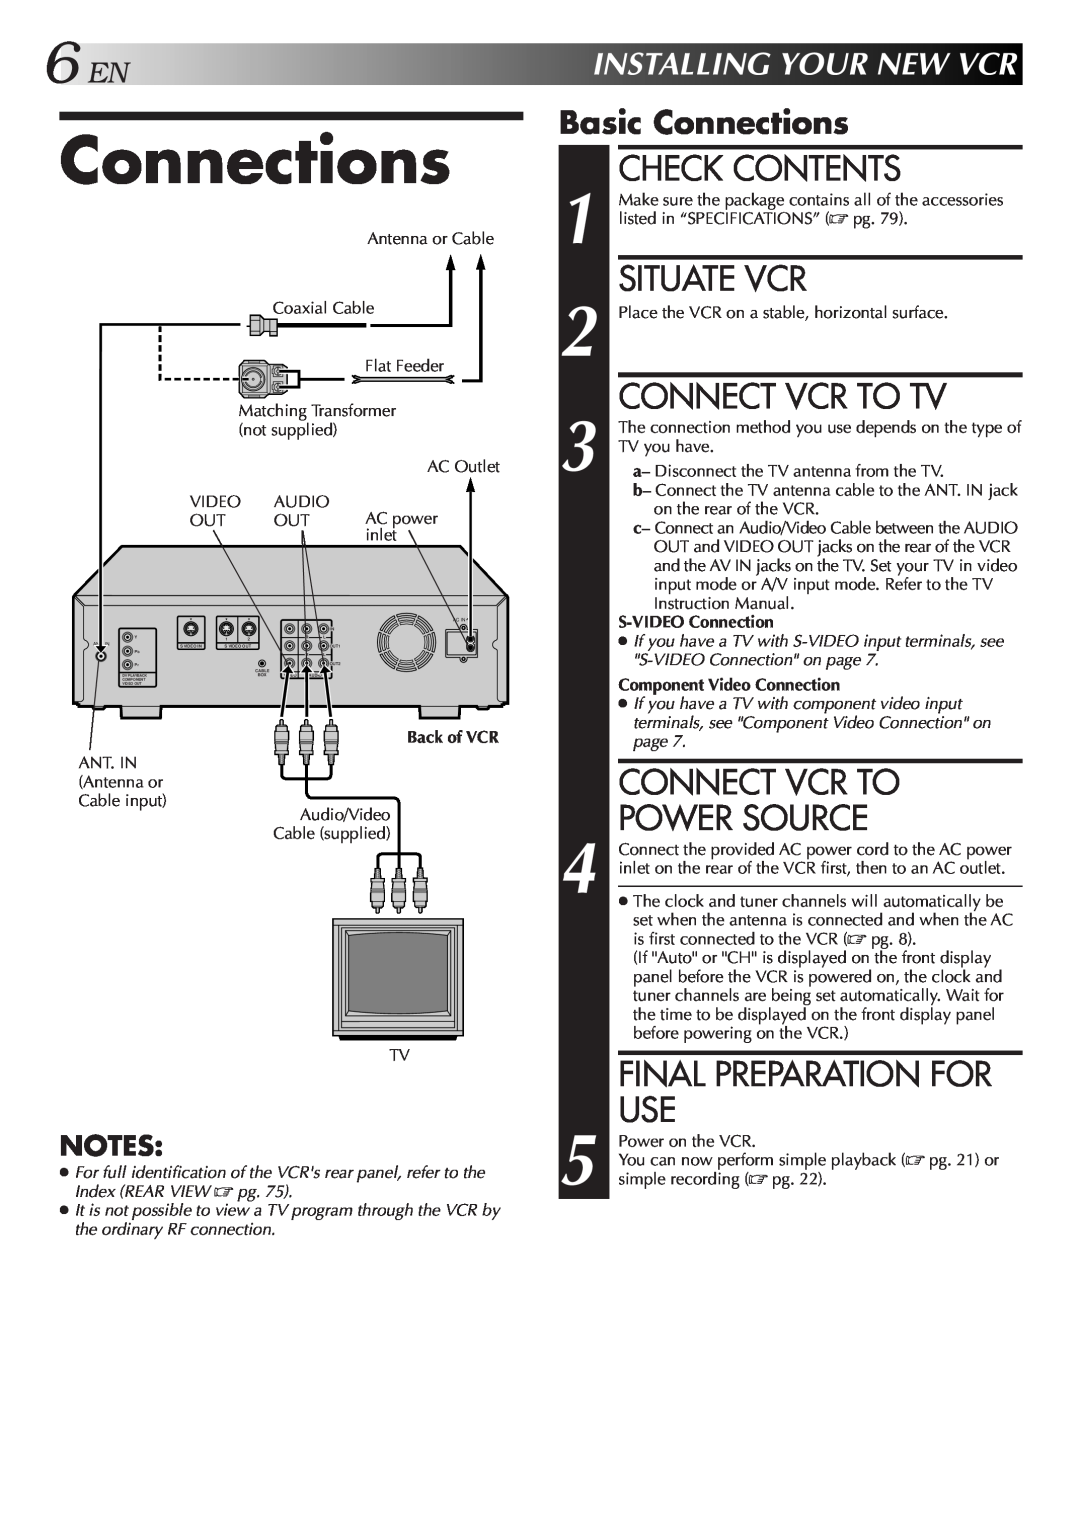 JVC SR-VS10U Check Contents, Situate Vcr, Connect Vcr To Tv, Connect Vcr To Power Source, Basic Connections, Notes 